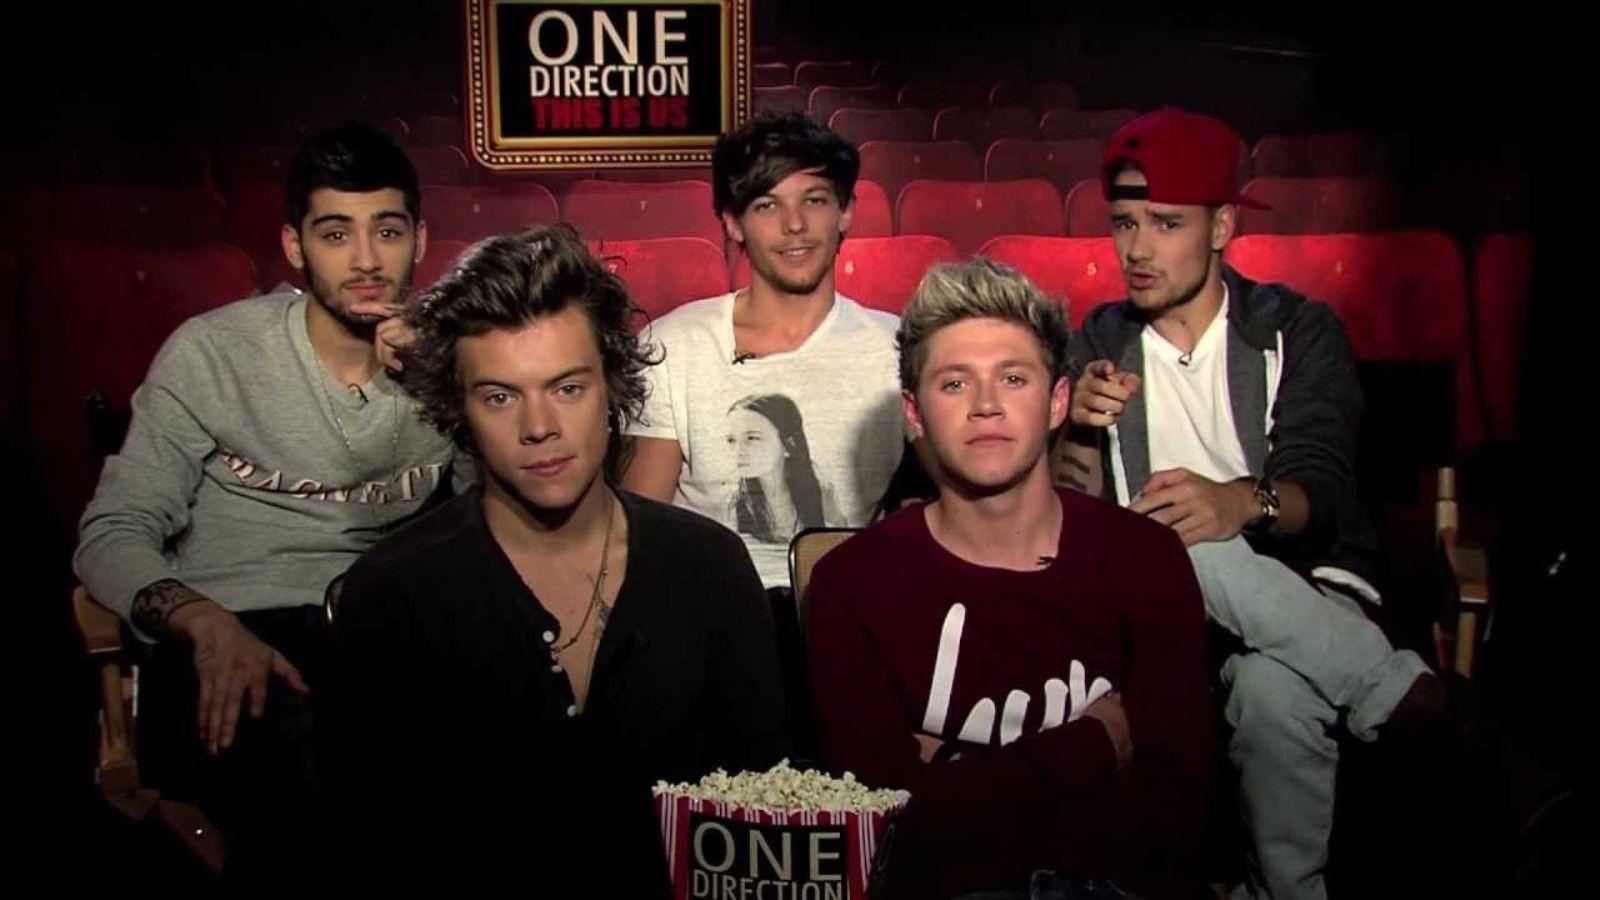 One Direction: This Is Us concert film